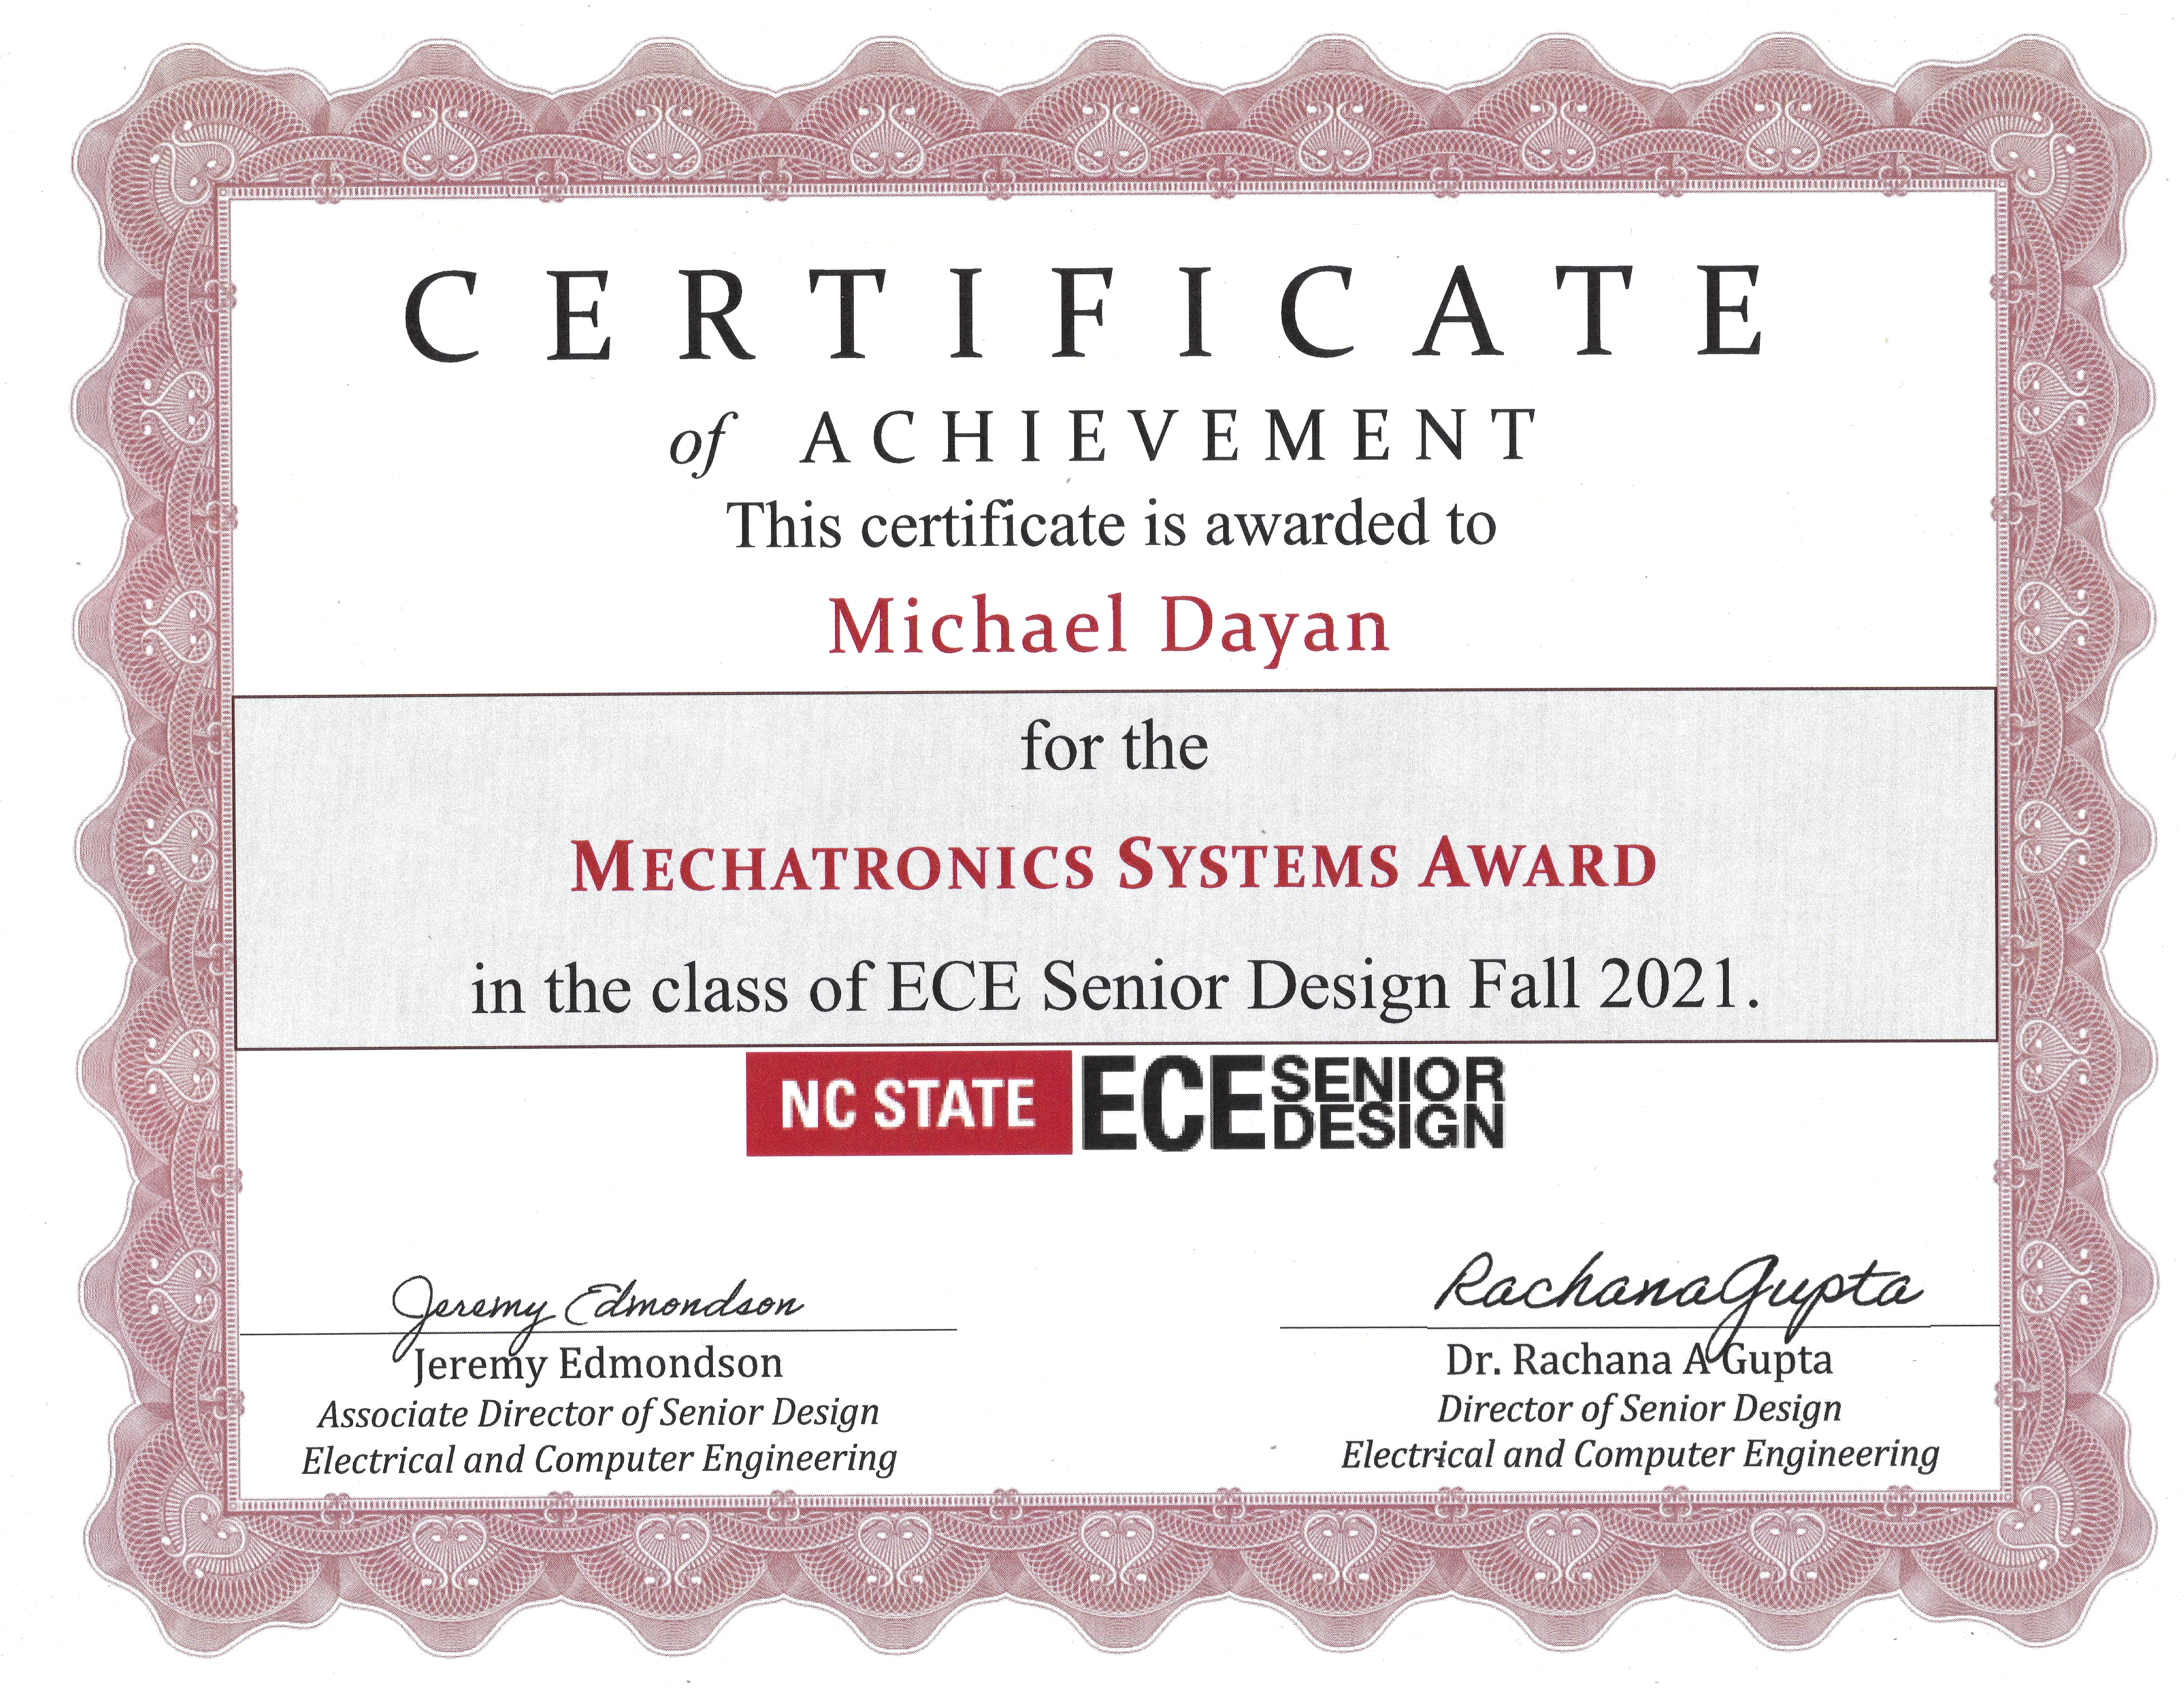 Picture of the individual commendation for excellence in mechatronics